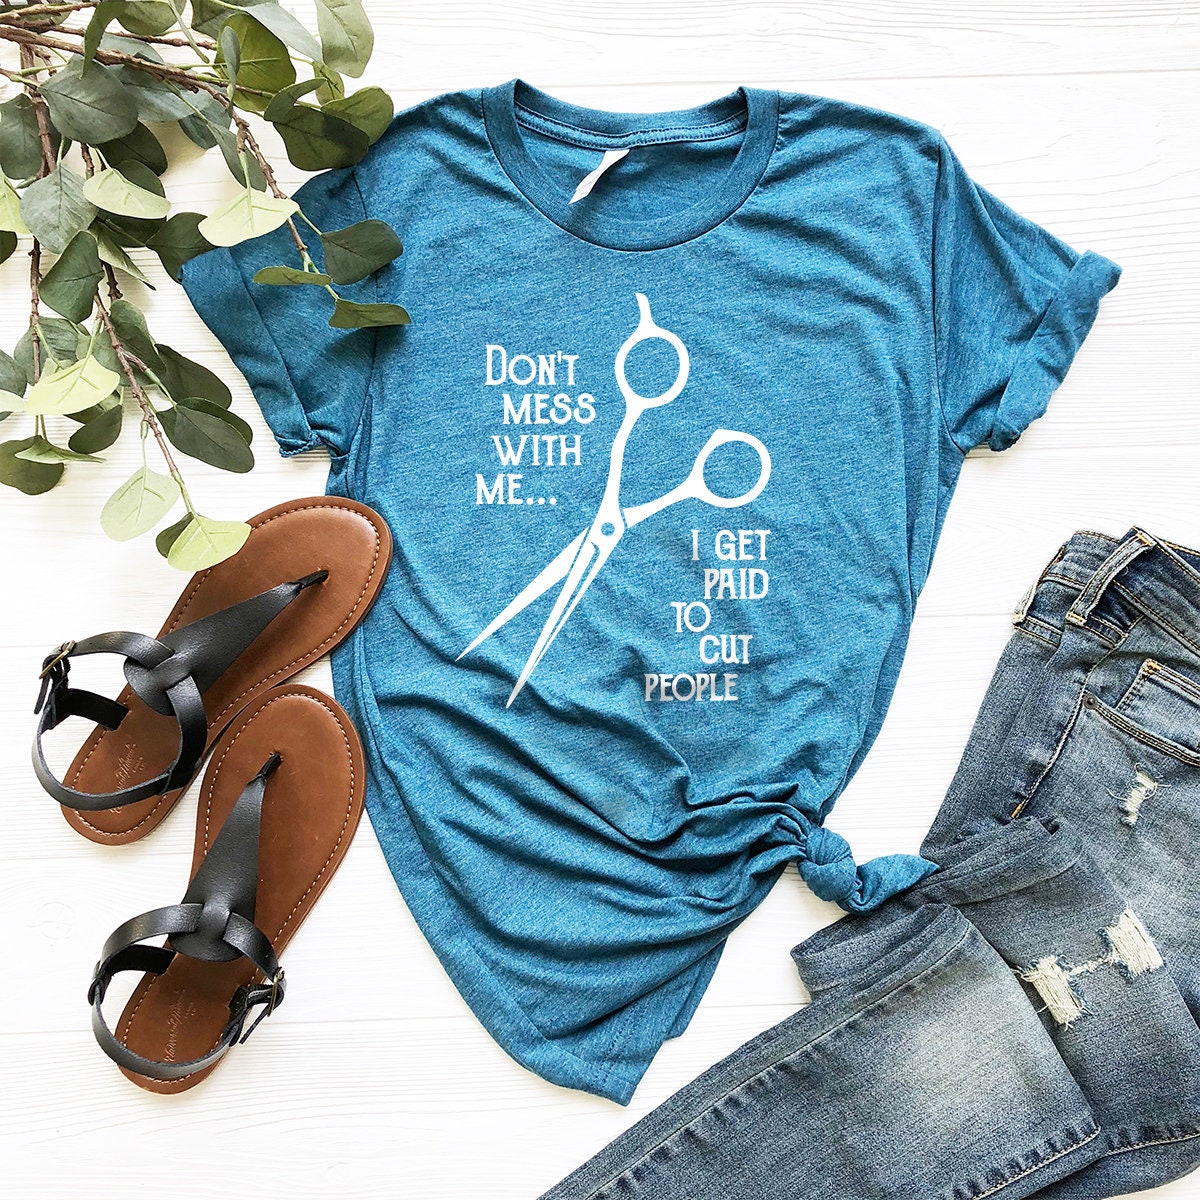 Funny Hairstylist Shirt, Gift For Hairdresser, Don't Mess With Me Shirt, I Get Paid To Cut People Shirt, Funny Barber T-Shirt - Fastdeliverytees.com